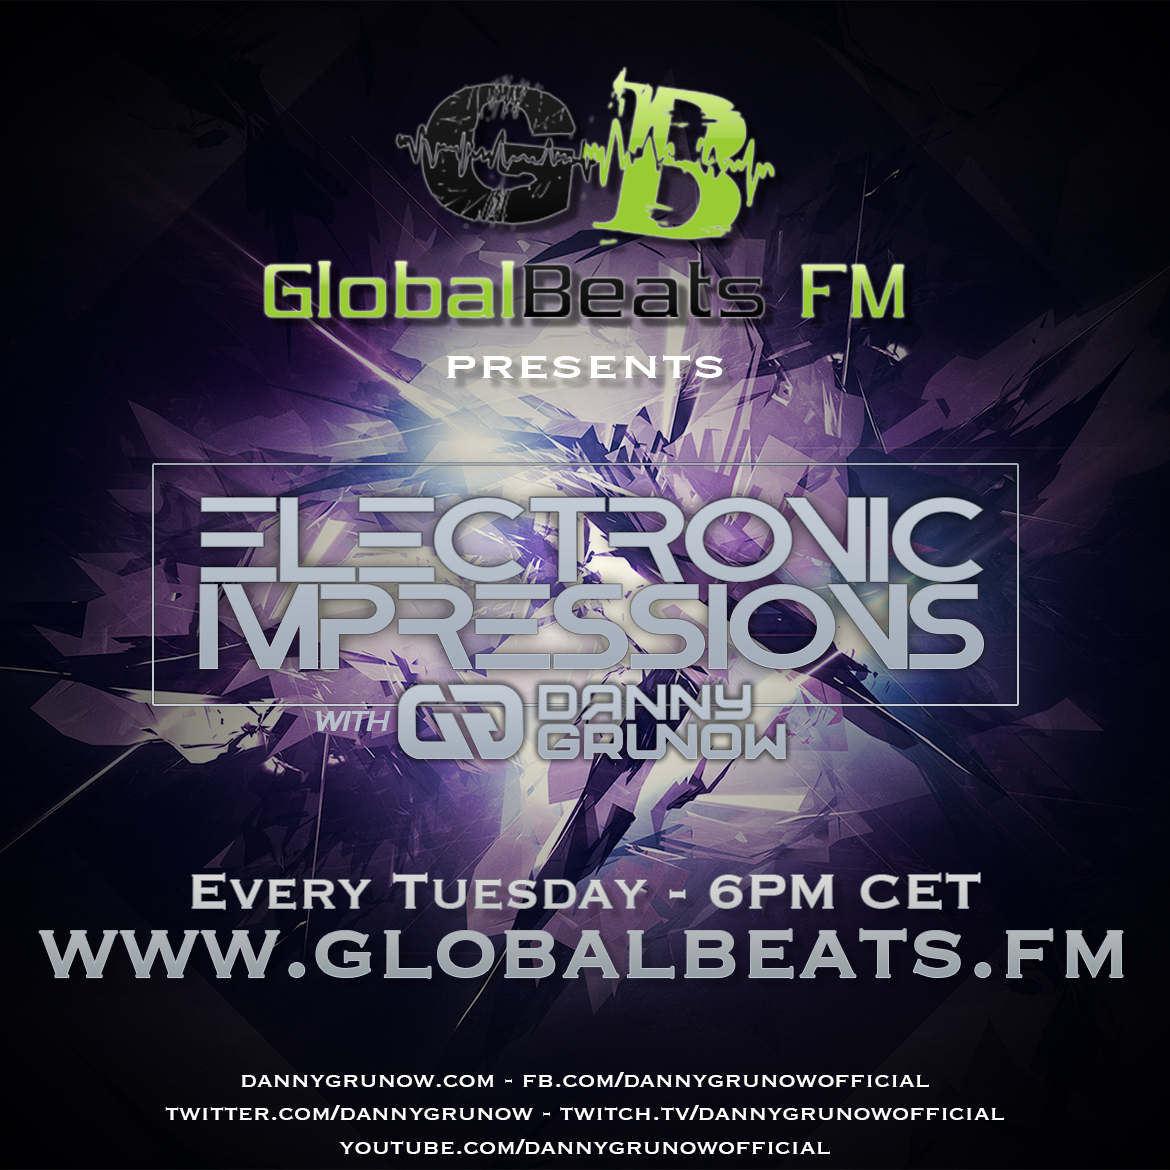 Now live on globalbeats.fm

Electronic Impressions 857 with Danny Grunow

Tune in and enjoy the music.

#Trance #Trancefamily #Trancelovers #UpliftingTrance #VocalTrance #TechTrance #Radioshow #Podcast #DJMix #livedj